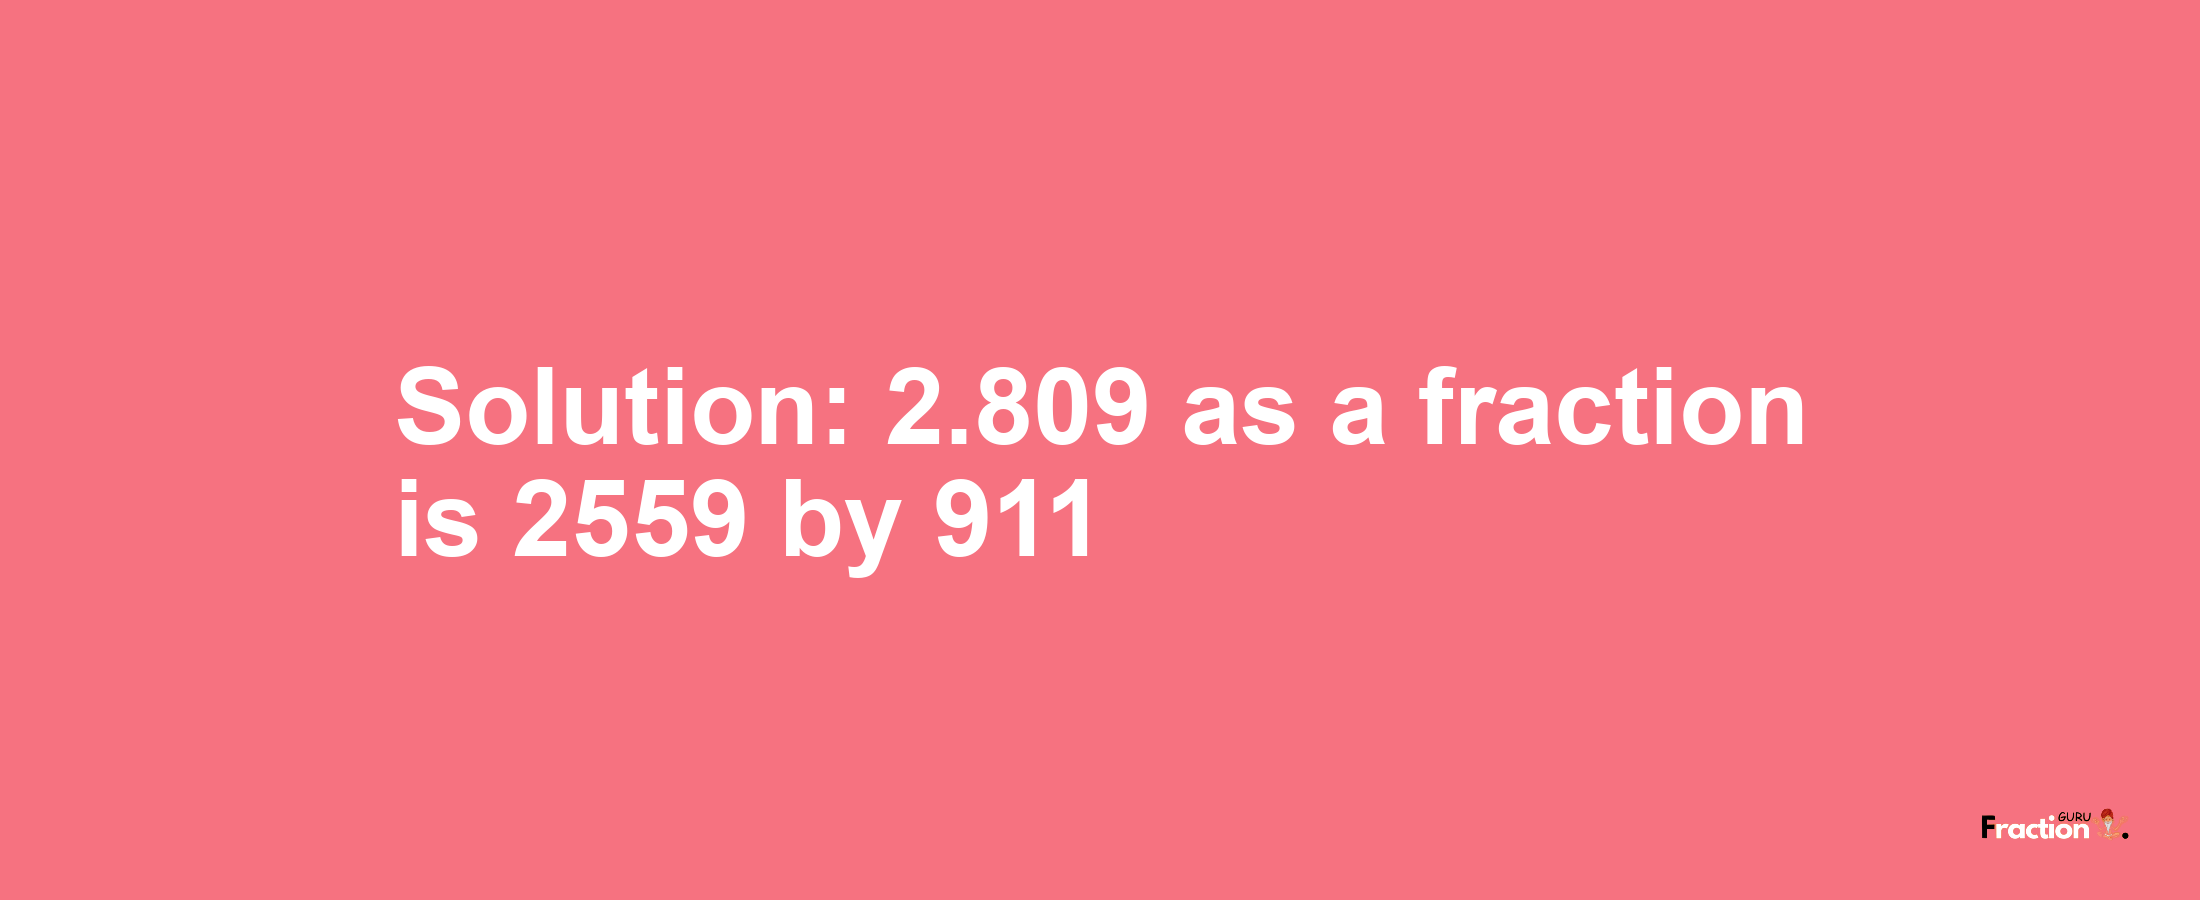 Solution:2.809 as a fraction is 2559/911